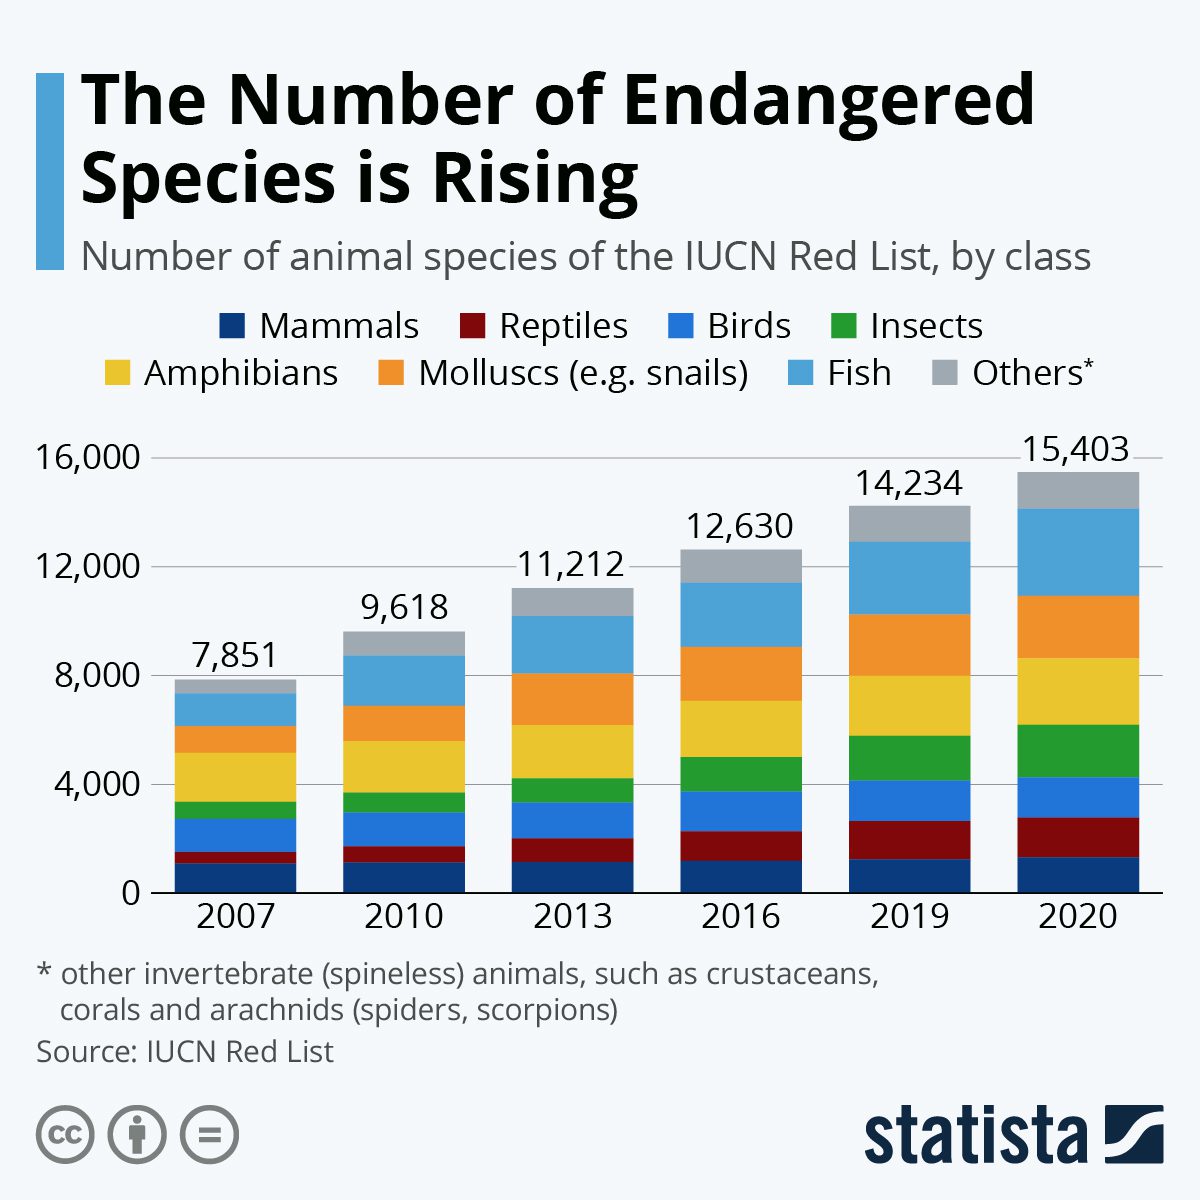 IUCN bar graph shows the steady increase in endangered species between 2007 and 2020